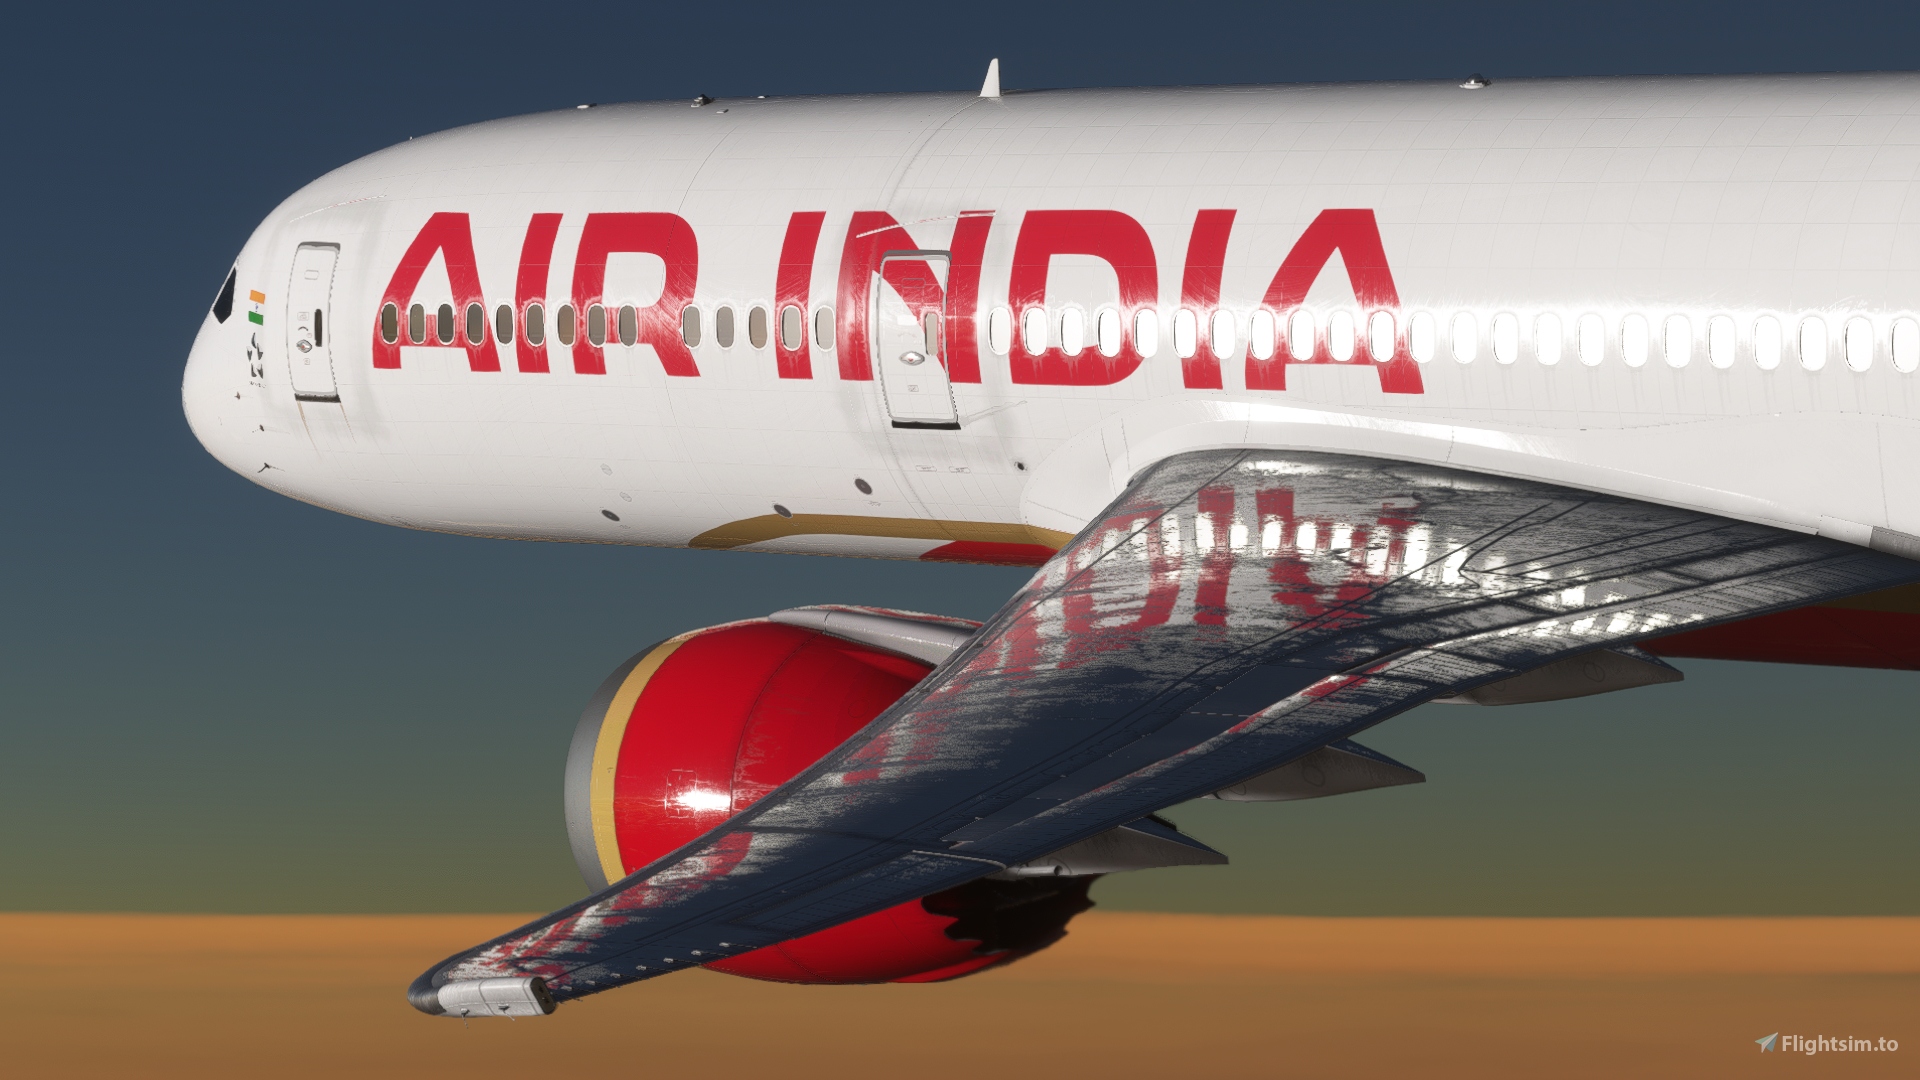 Air India unveils new logo 'The Vista' and livery in rebranding push |  Company News - Business Standard